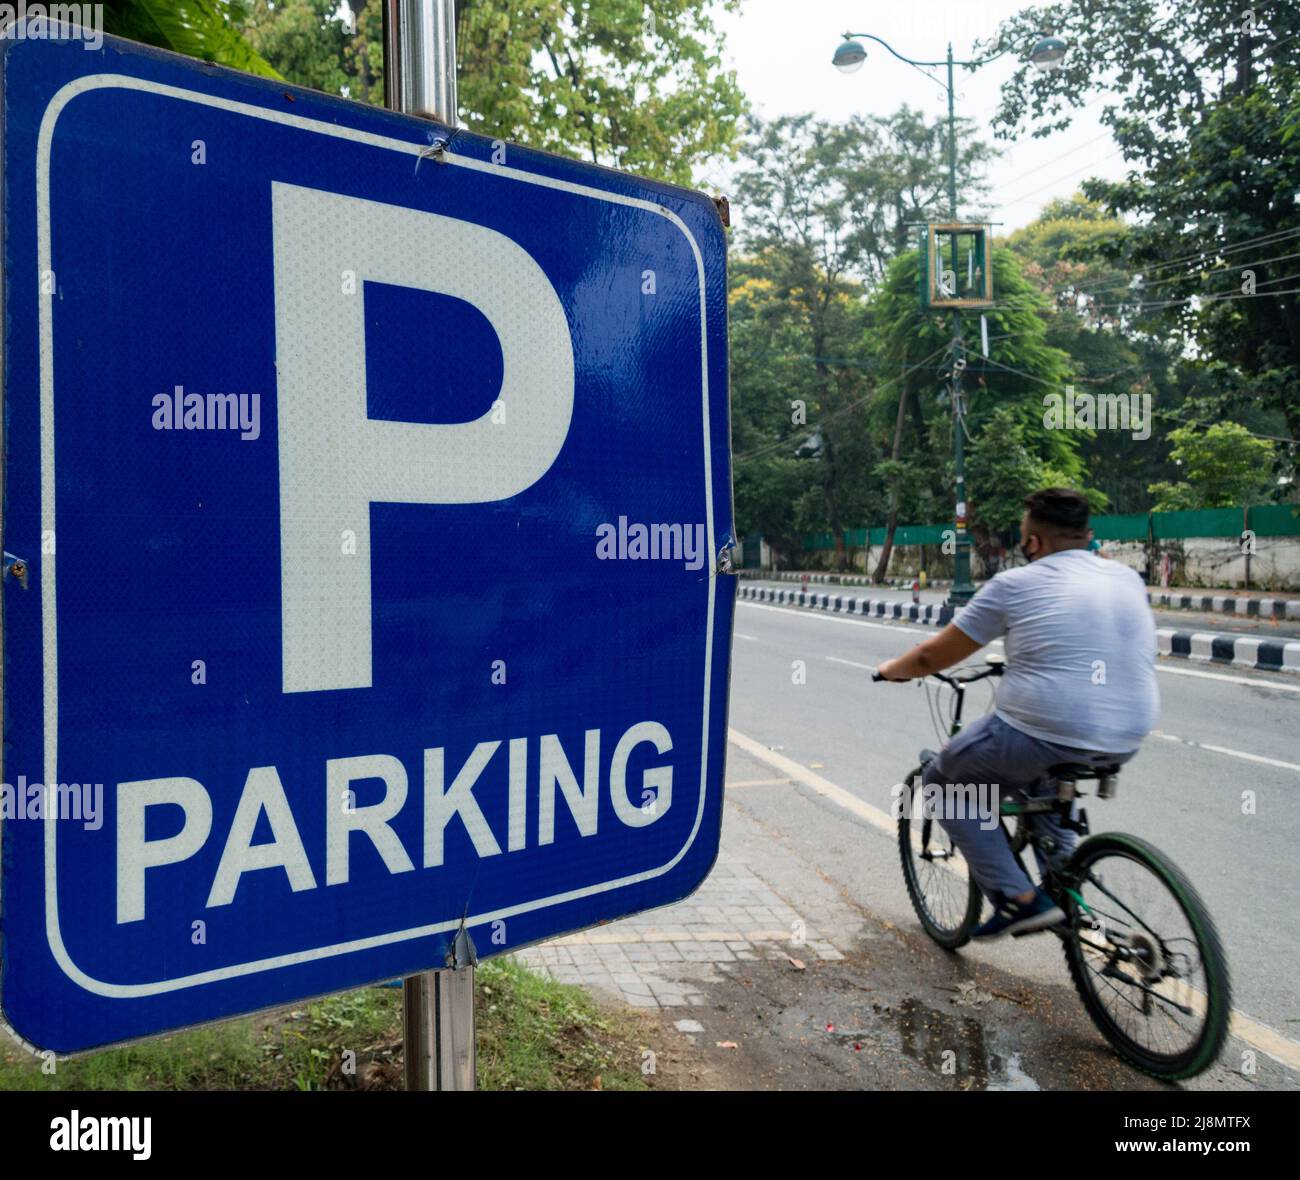 14th July 2020. Uttarakhand, India. A big blue roadside Parking sign with a big P written in white and a man riding in a picture.a Stock Photo